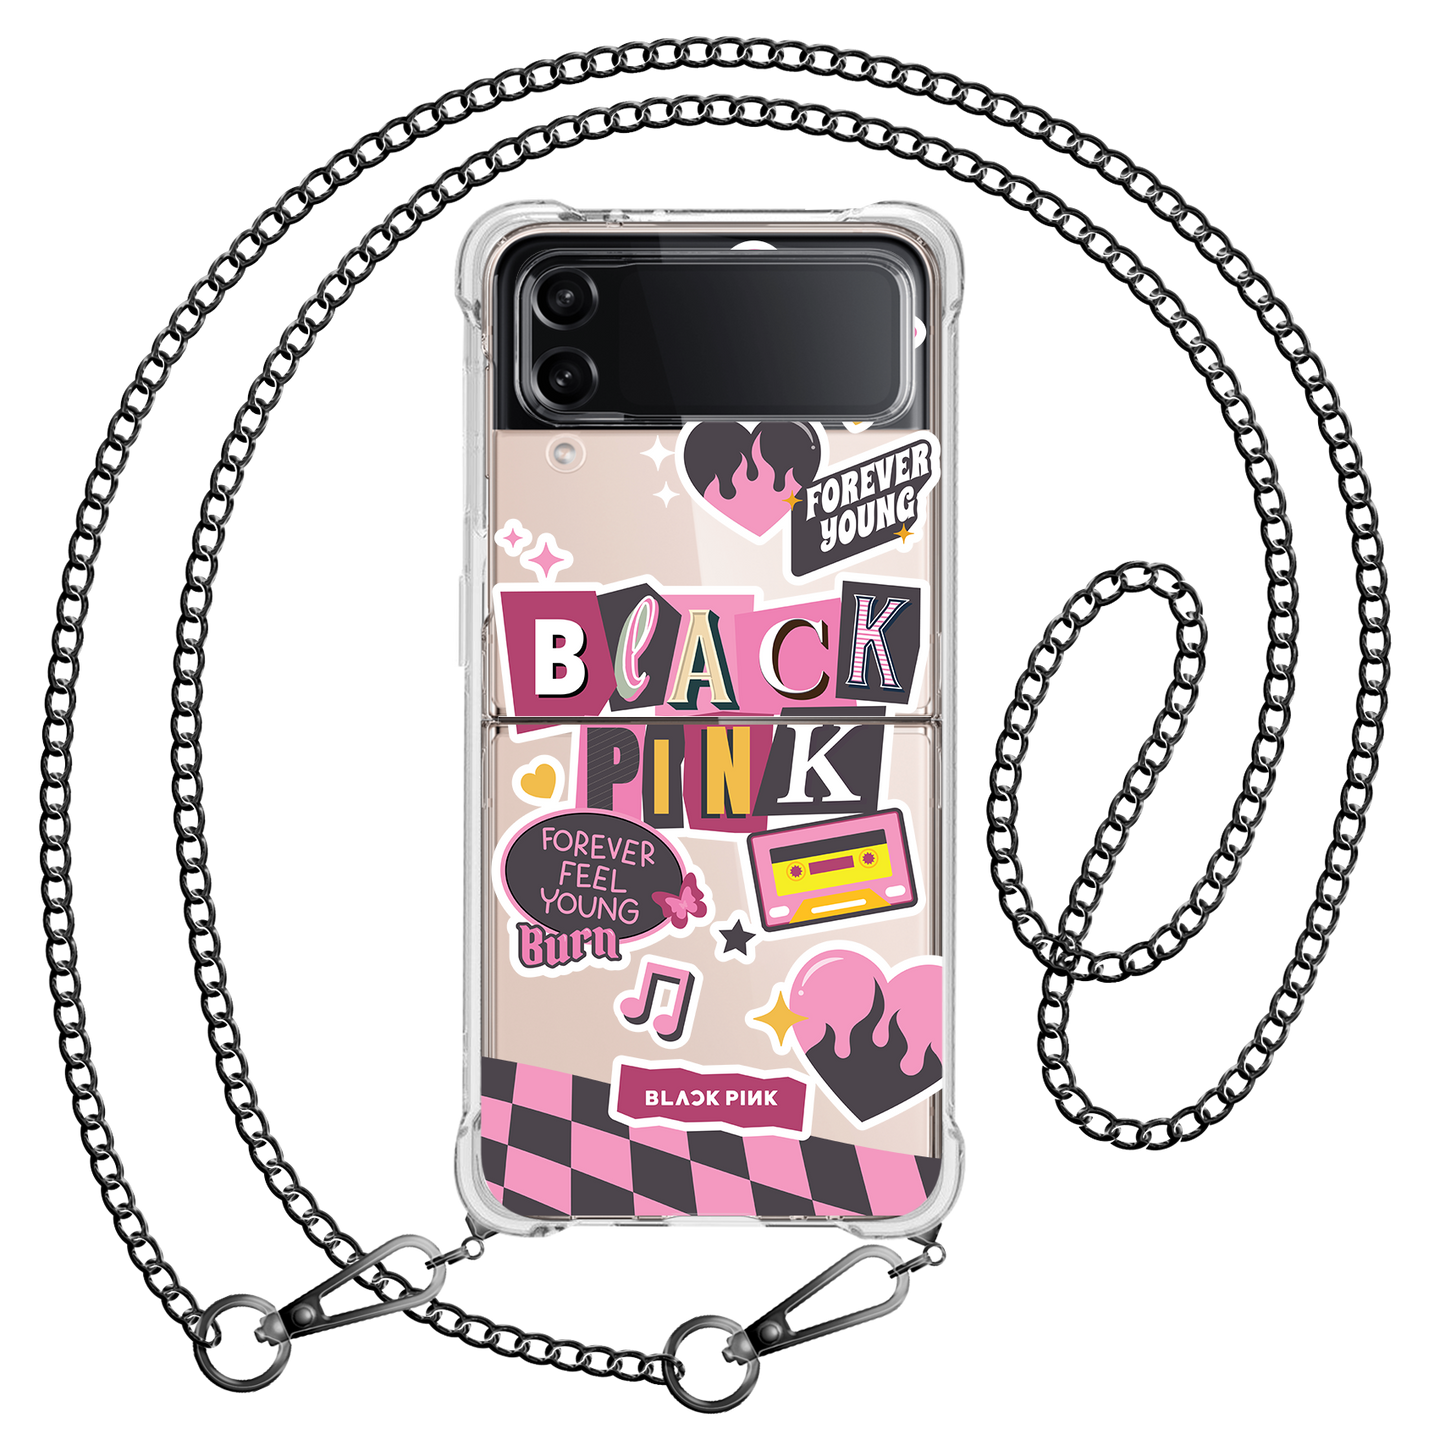 Android Flip / Fold Case - Blackpink Forever Young